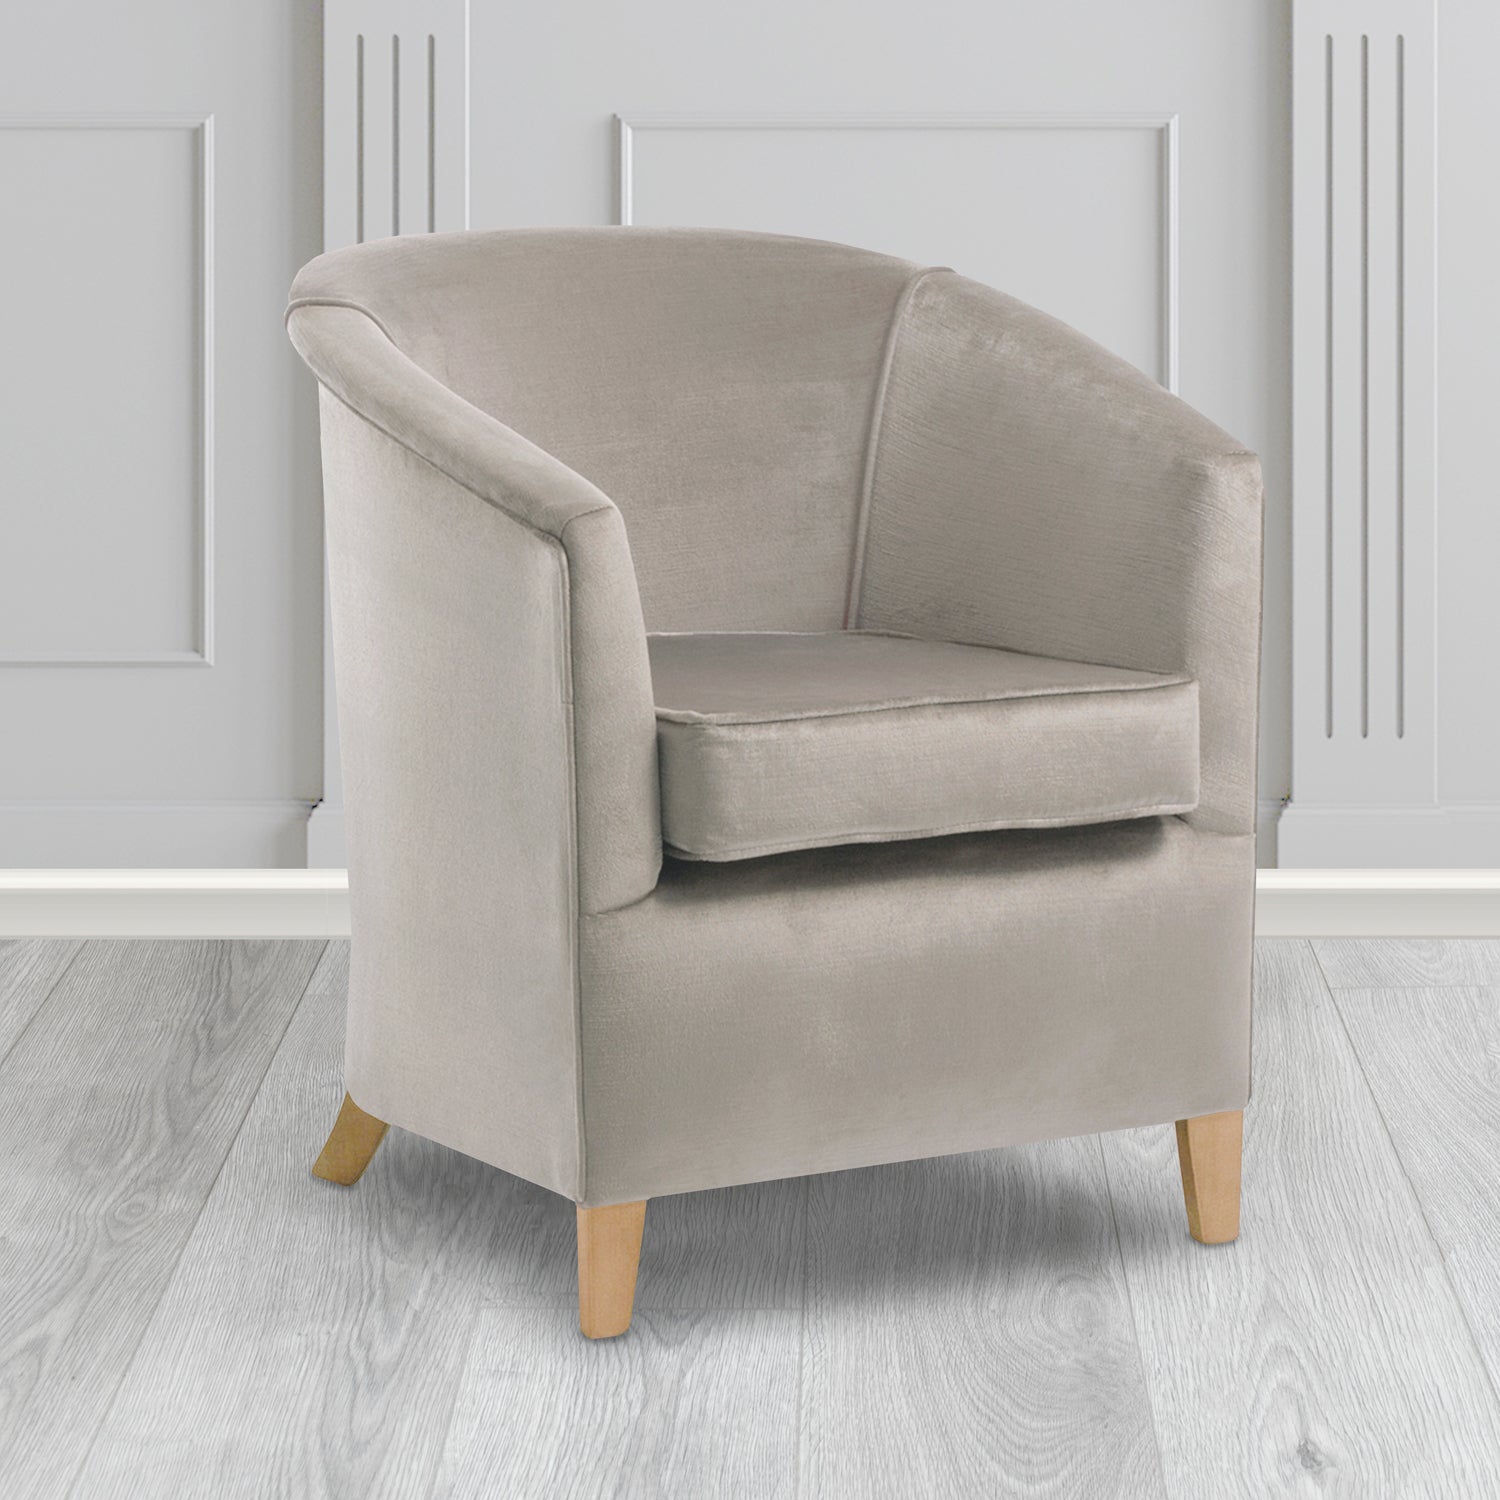 Jasmine Tub Chair in Noble 952 Platinum Crib 5 Velvet Fabric - Water Resistant - The Tub Chair Shop